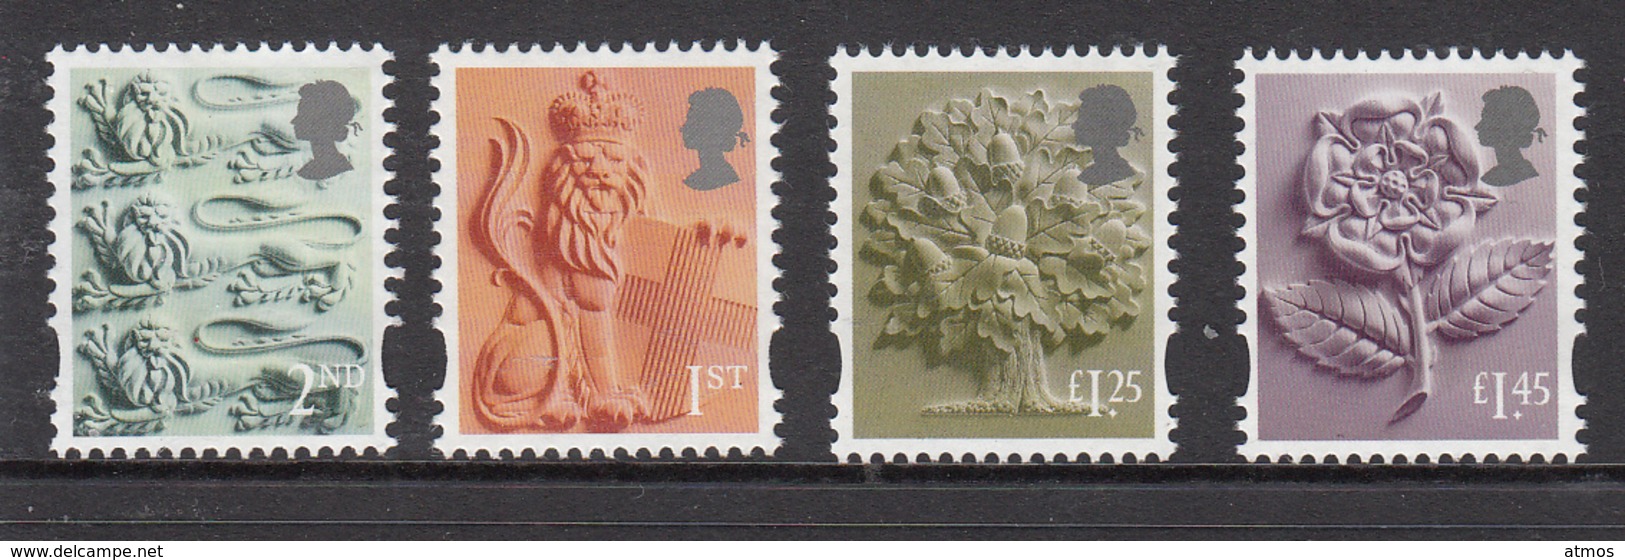 Great Britain MNH Country Definitives England 2018 - England